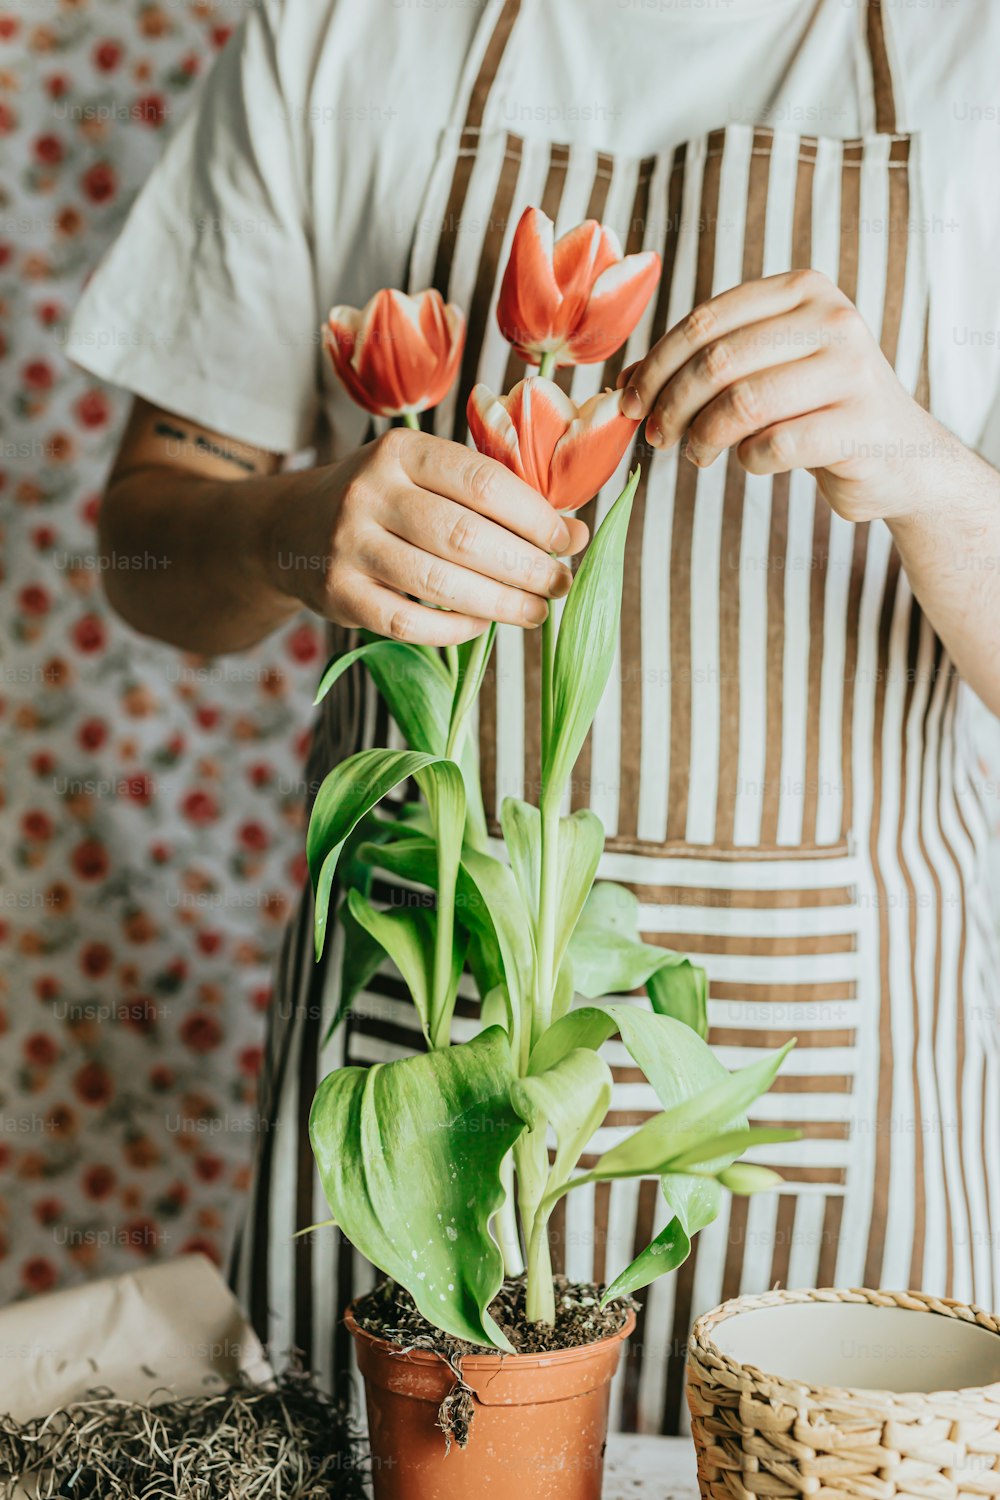 a person in an apron holding a potted plant